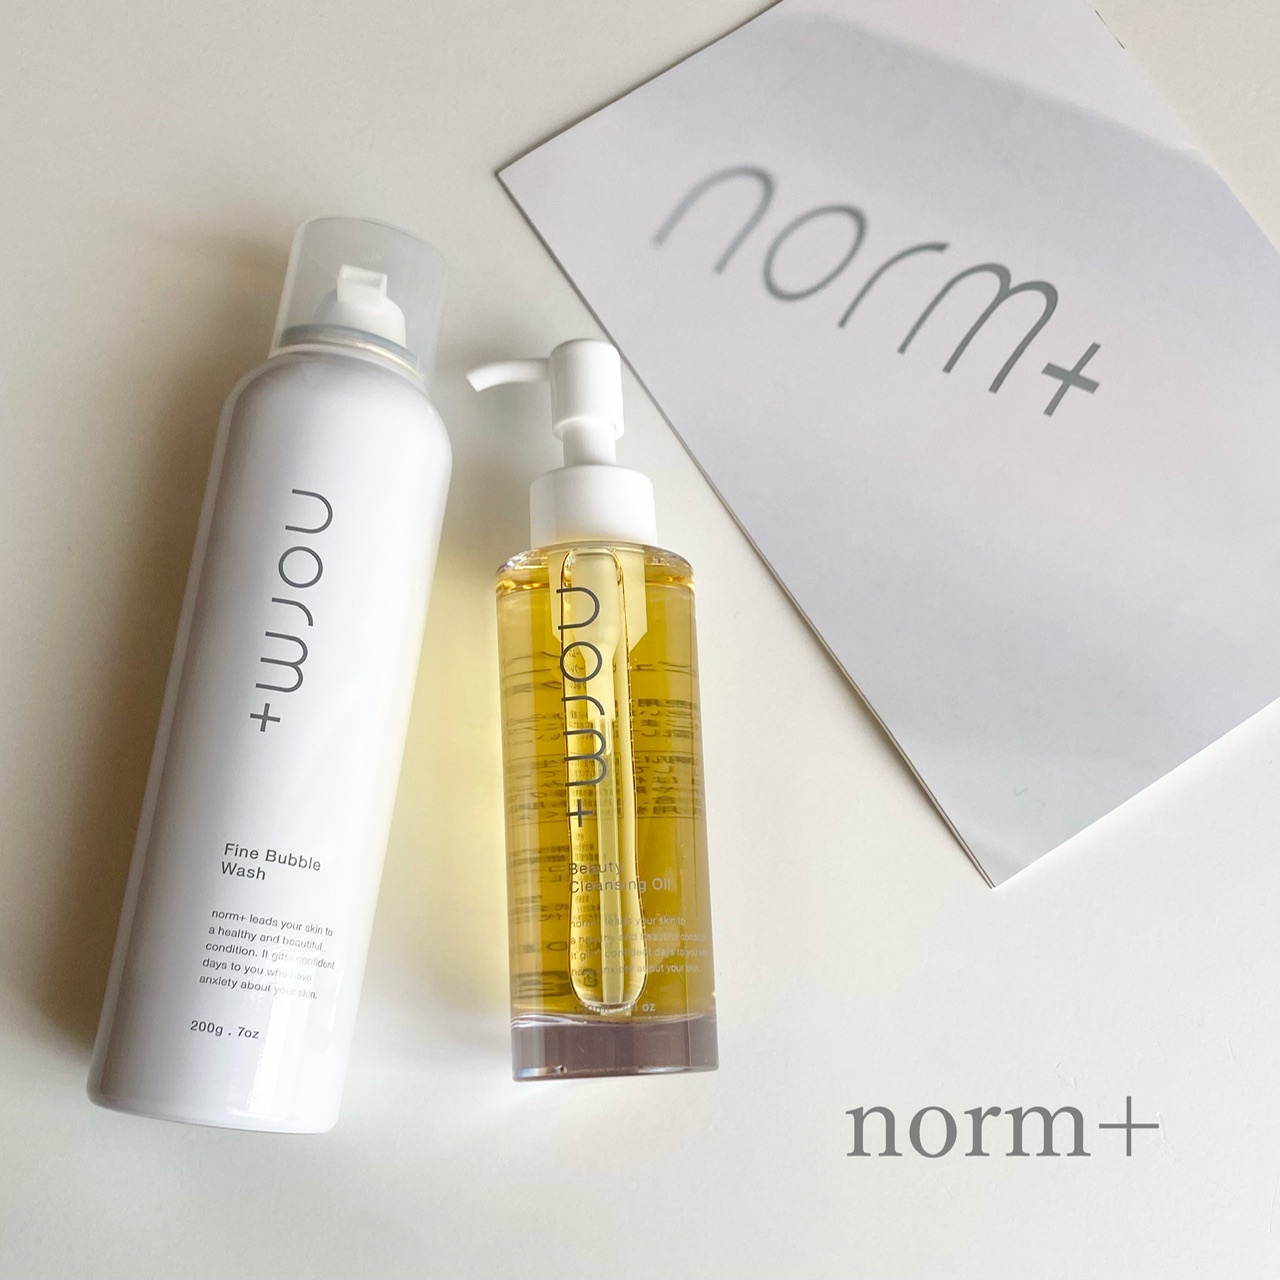 norm+ / Fine Bubble Washの公式商品情報｜美容・化粧品情報はアットコスメ